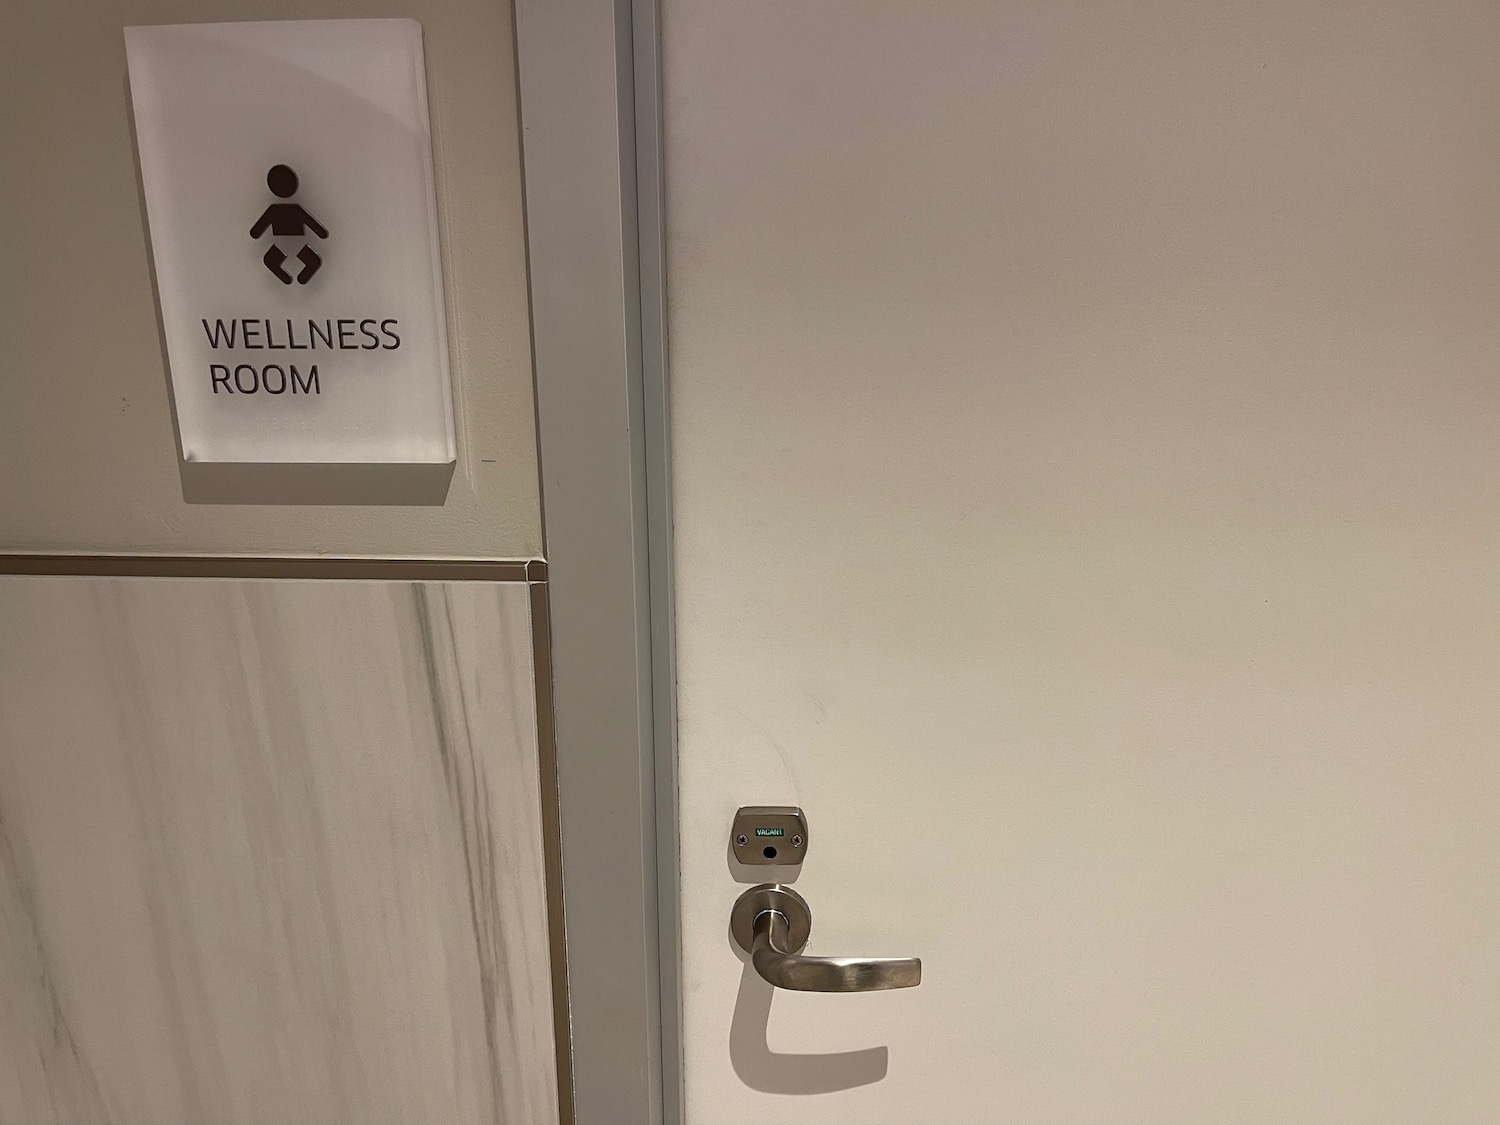 a door with a sign and a handle